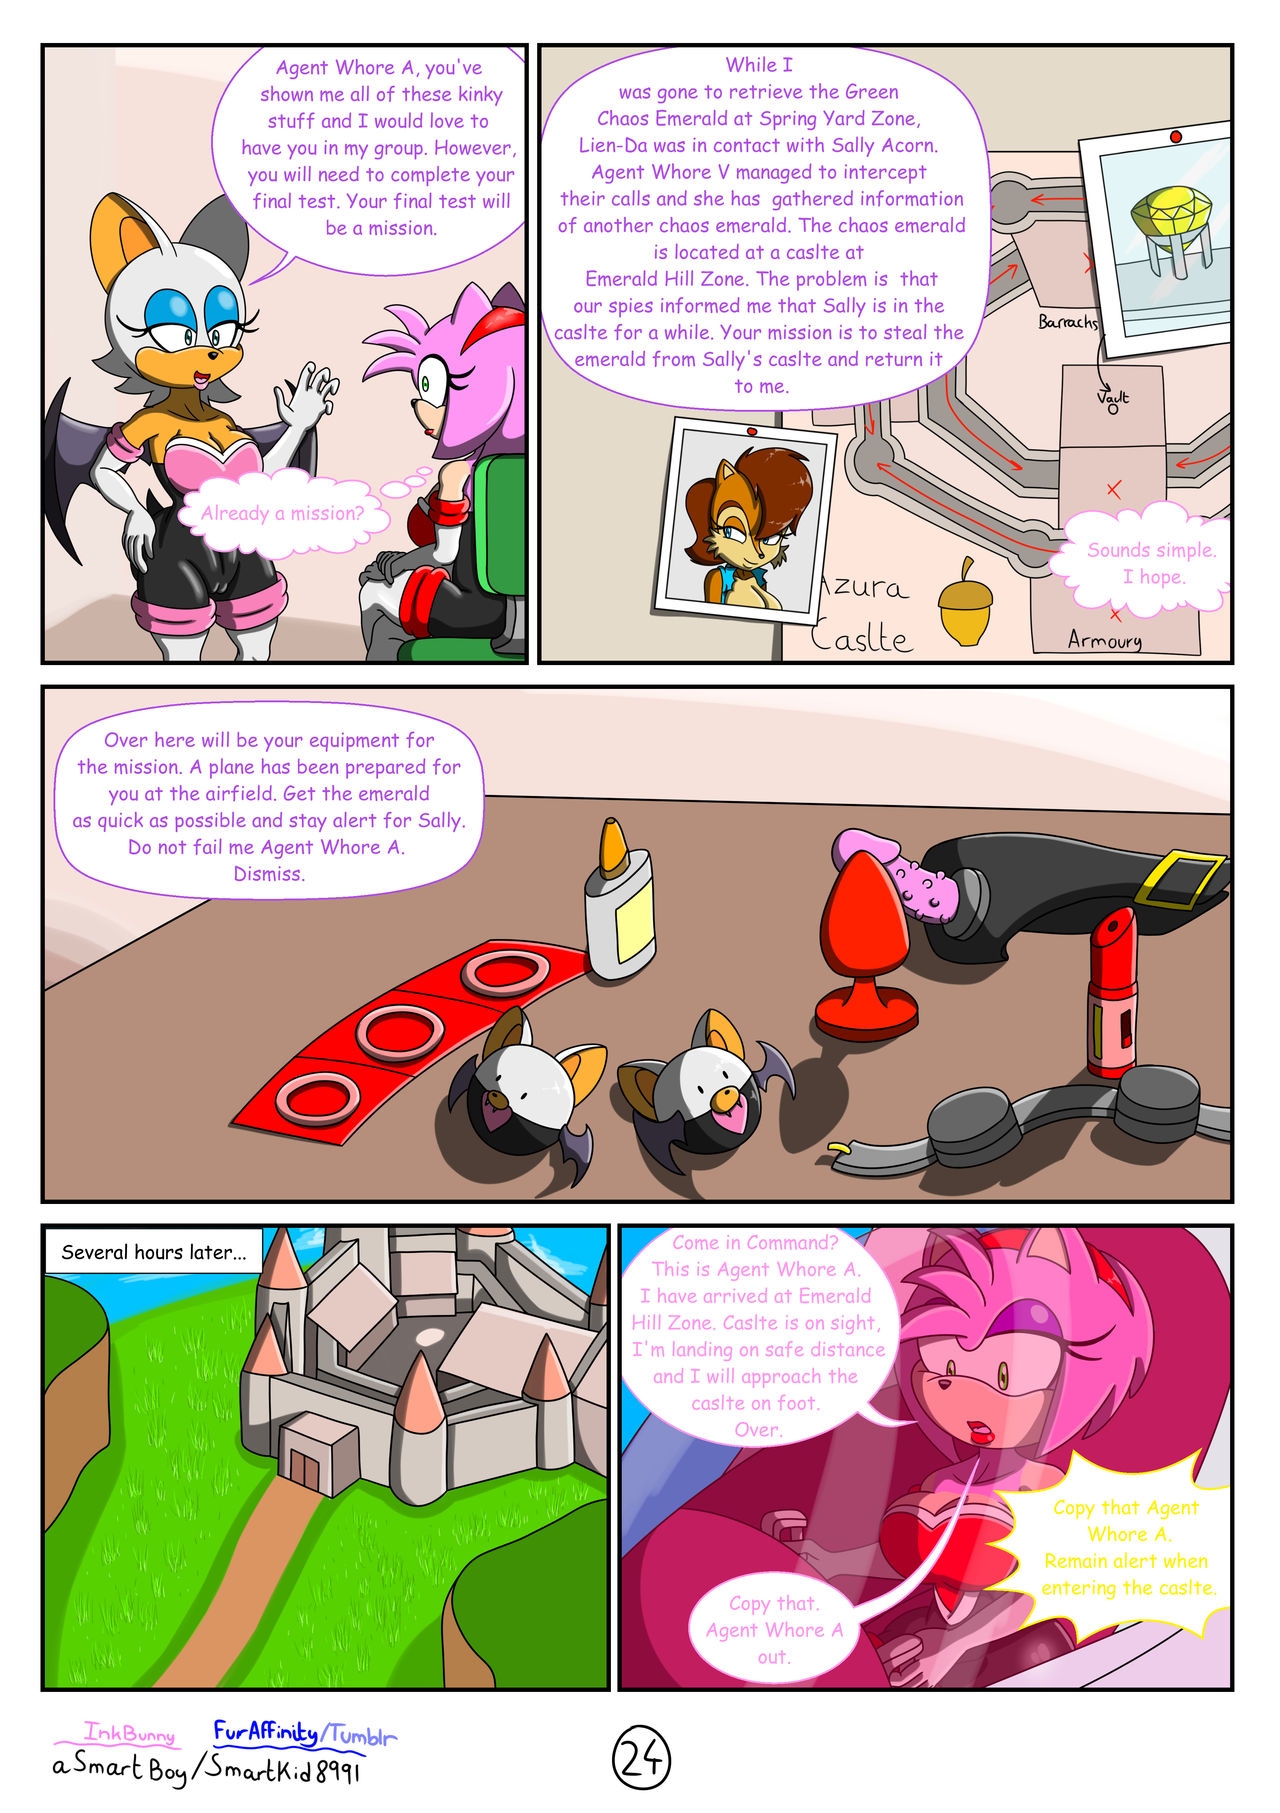 [SmartKid8991] Agent Whore Bootcamp (Sonic The Hedgehog) [Ongoing] 24